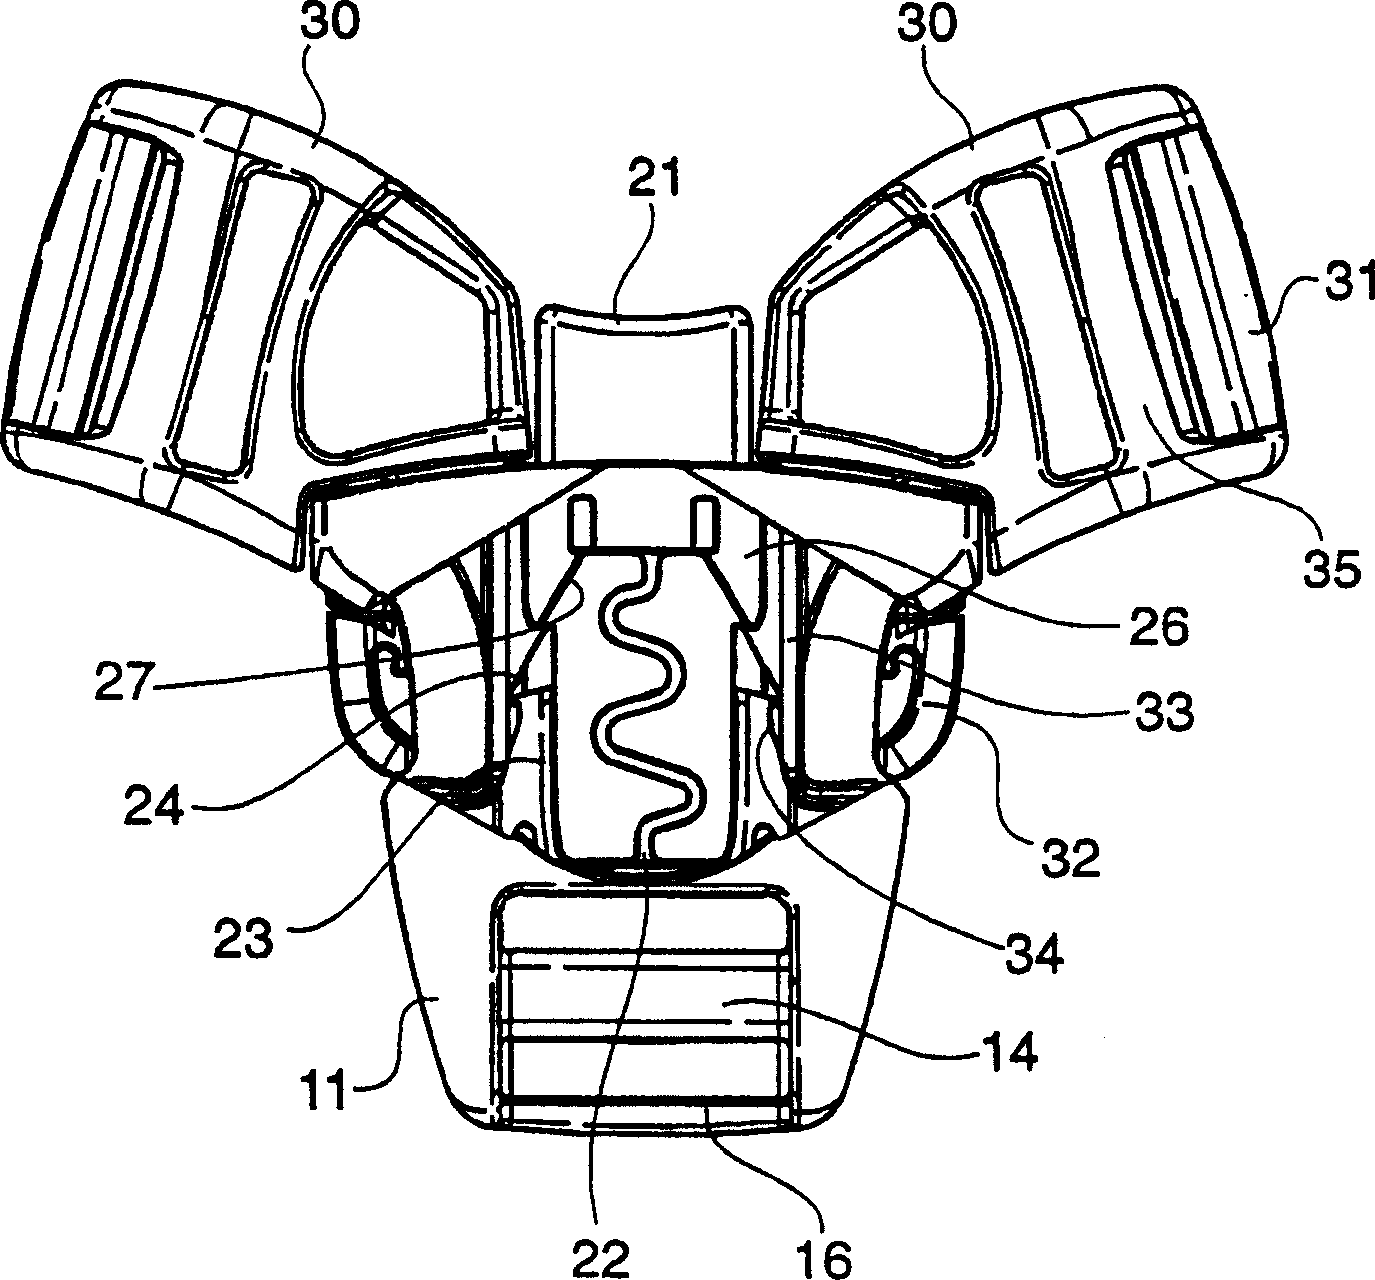 Buckle assembly